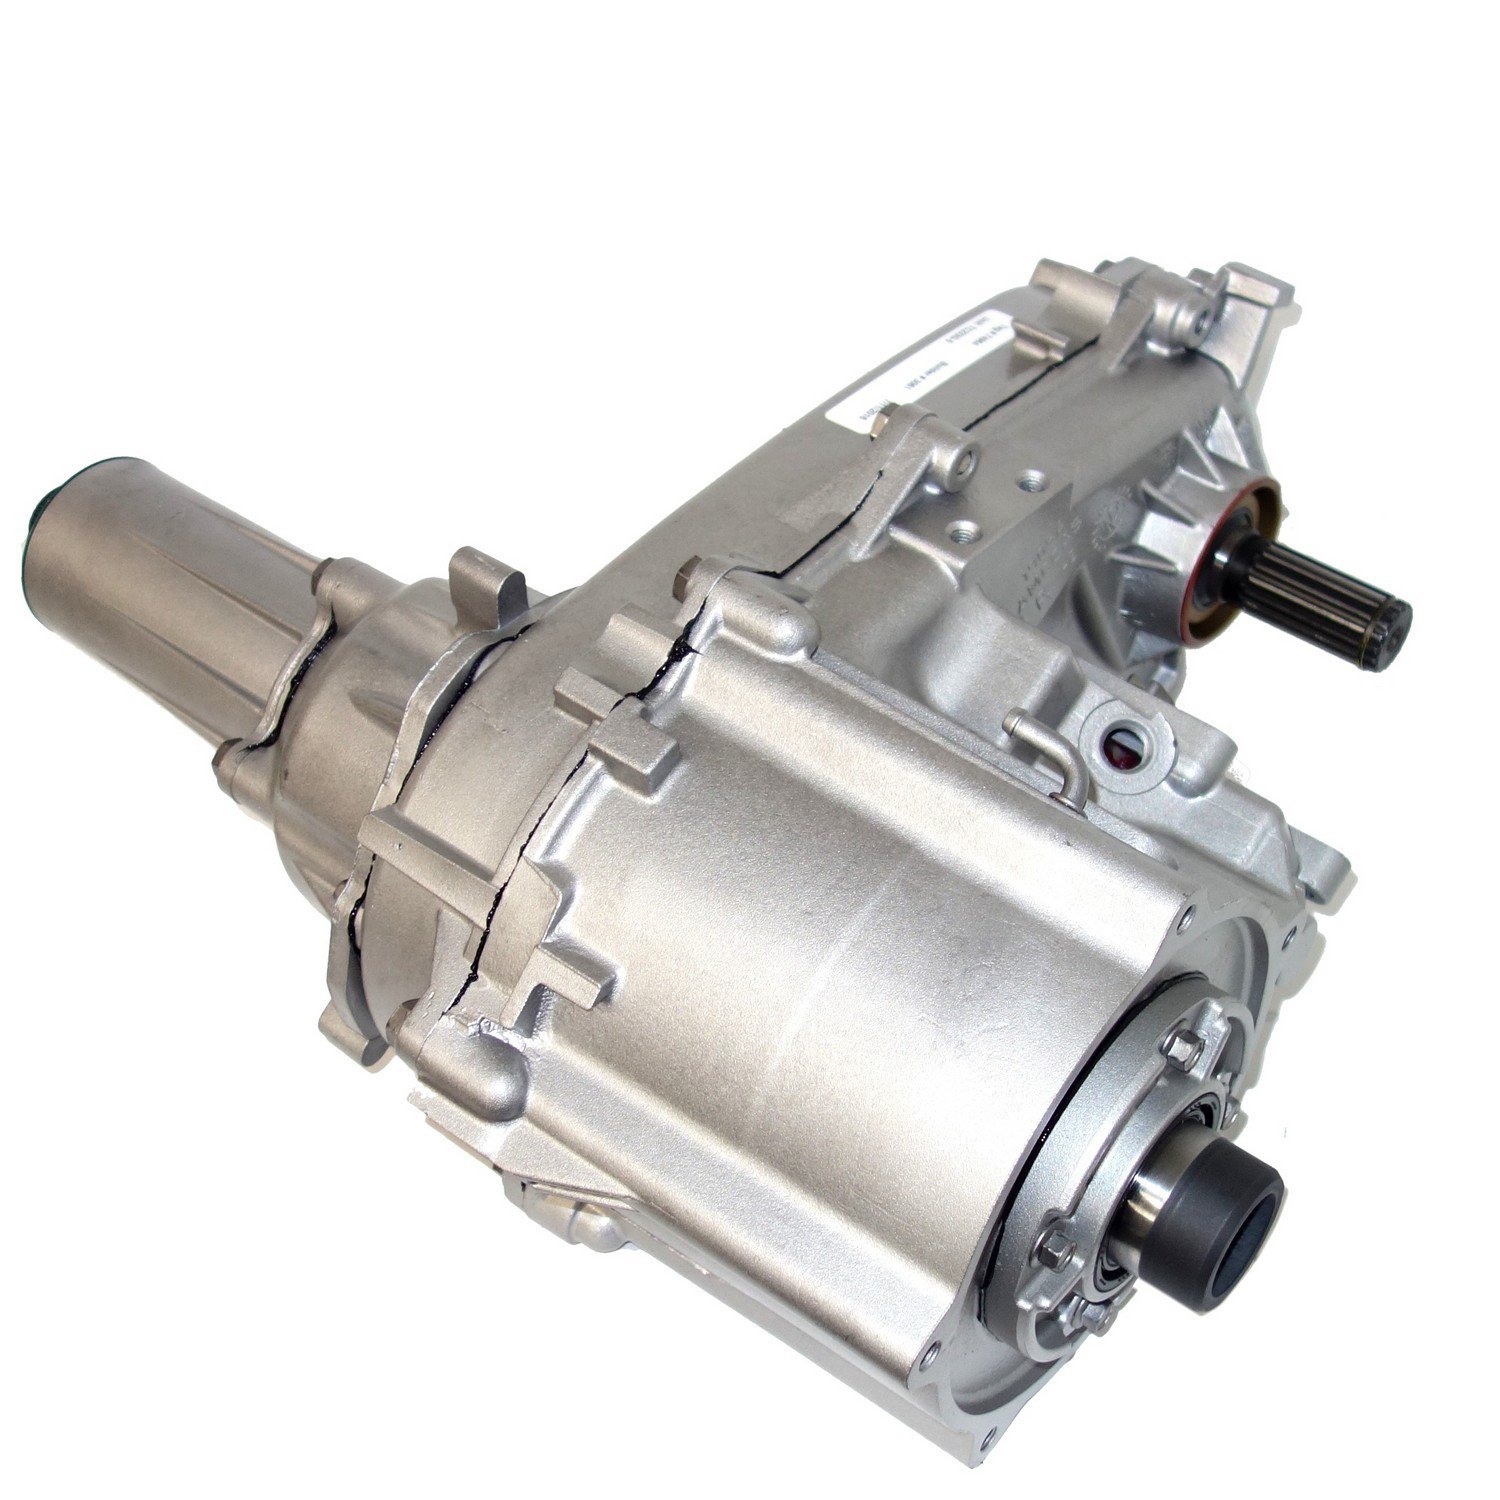 Remanufactured NP233 Transfer Case for GM 92-94 S10